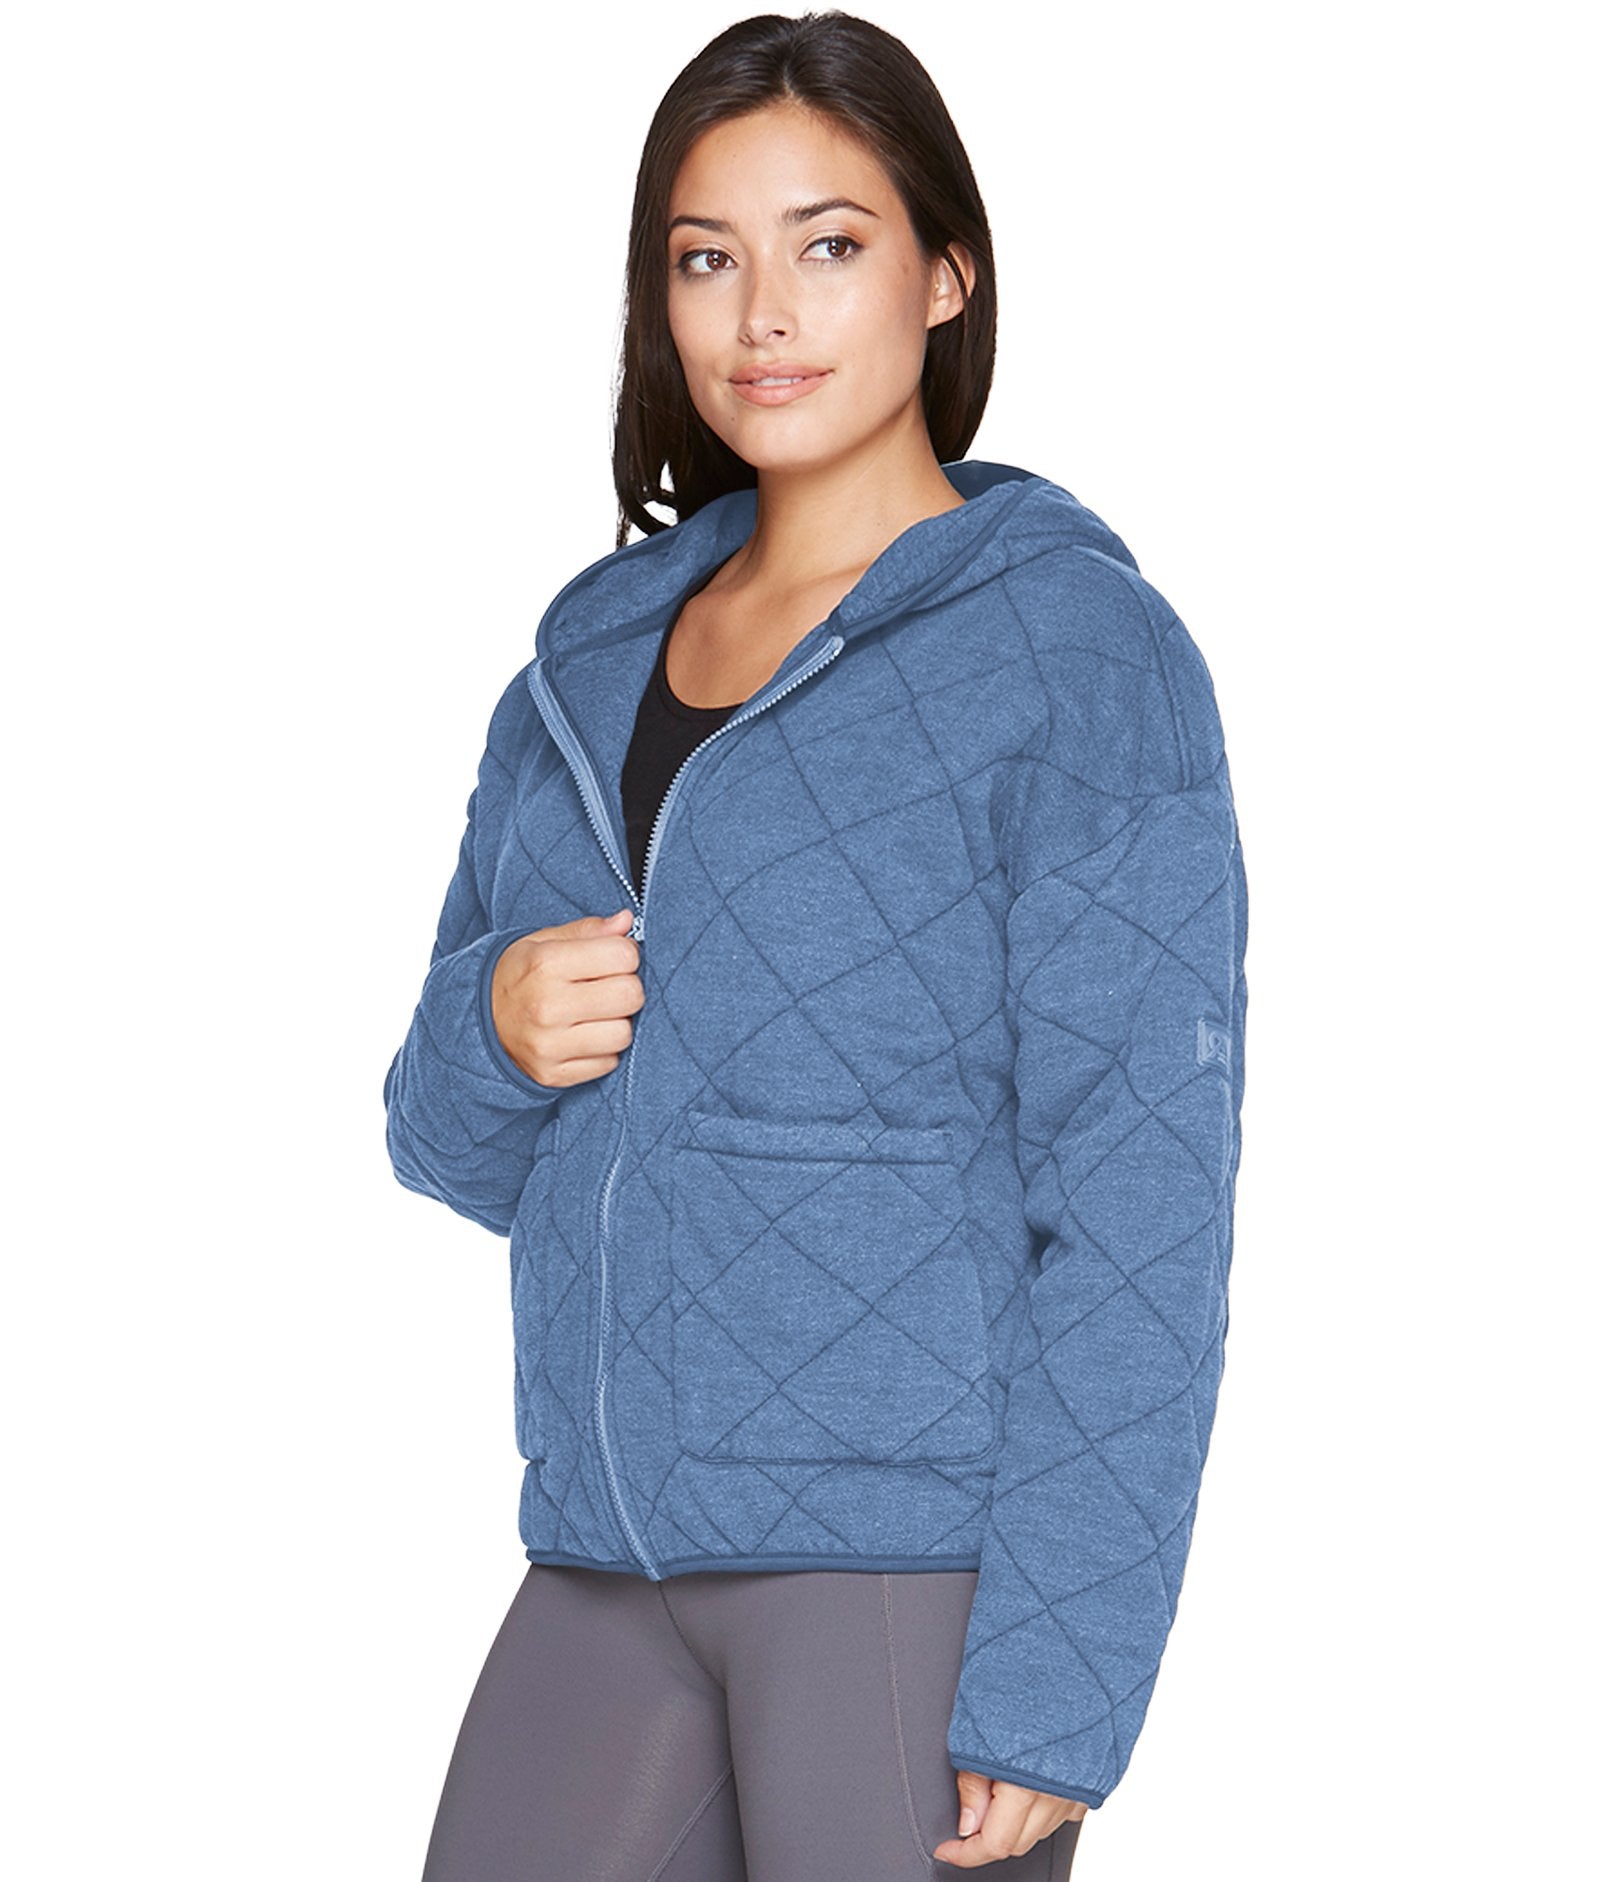 Women's Post Blue Selene Washed Quilted Jacket